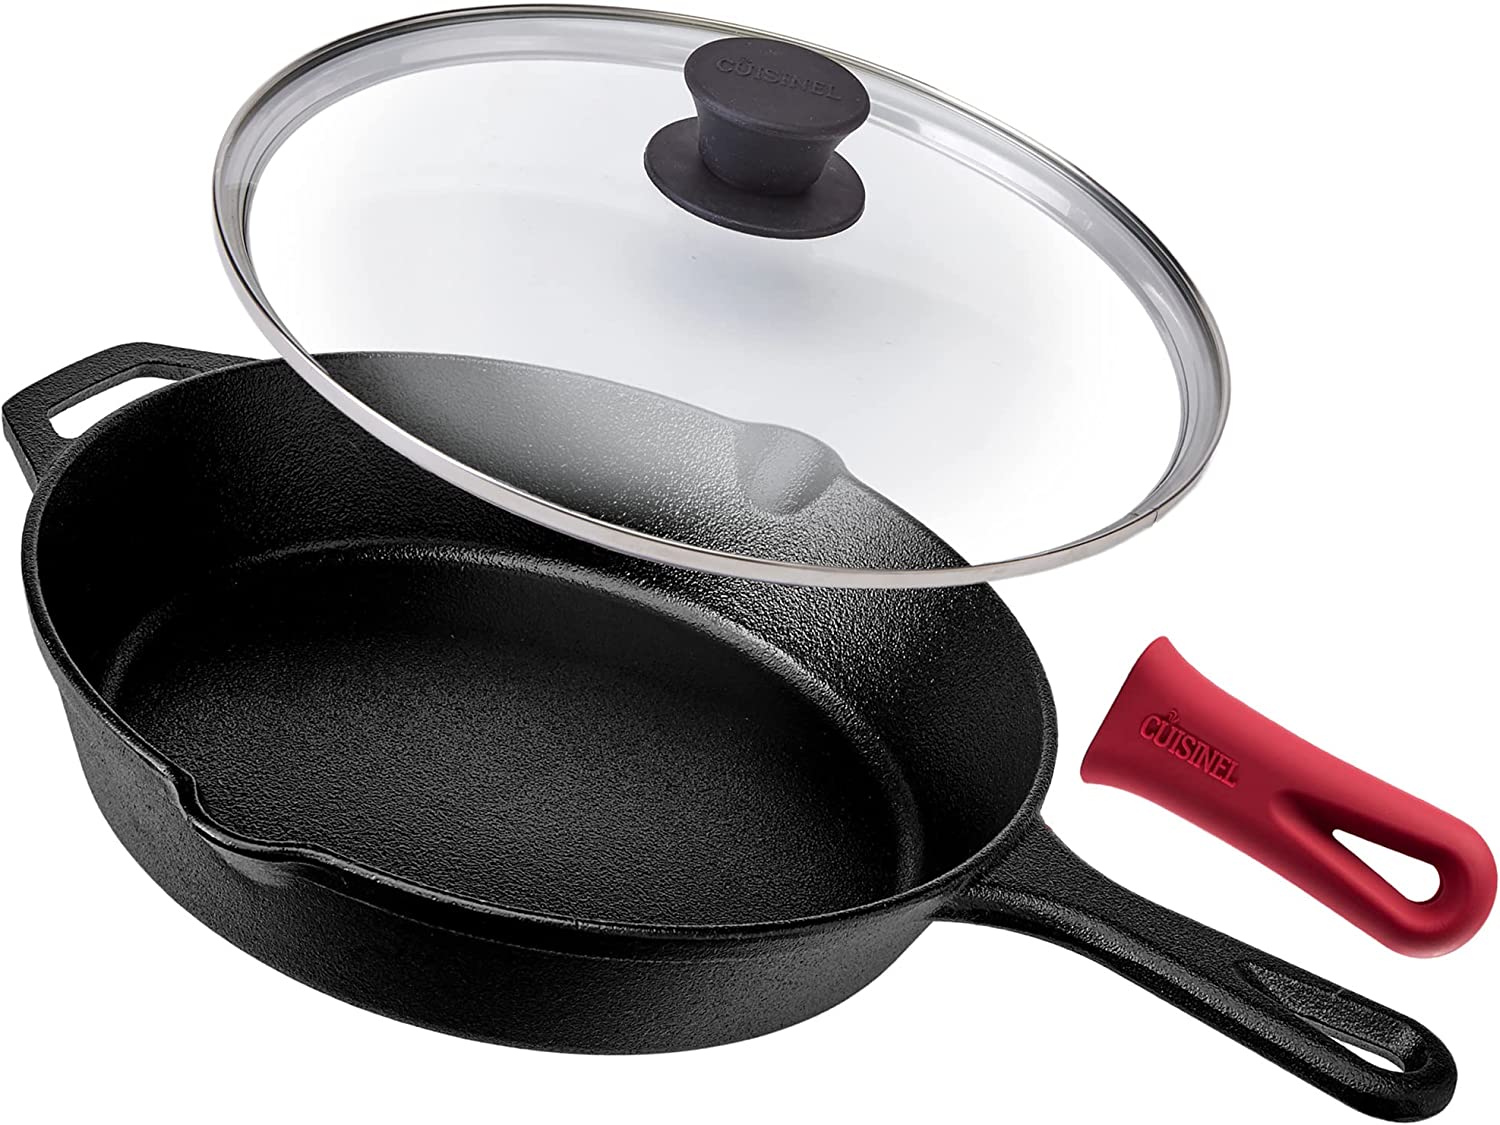 Cast Iron Skillet with Lid.